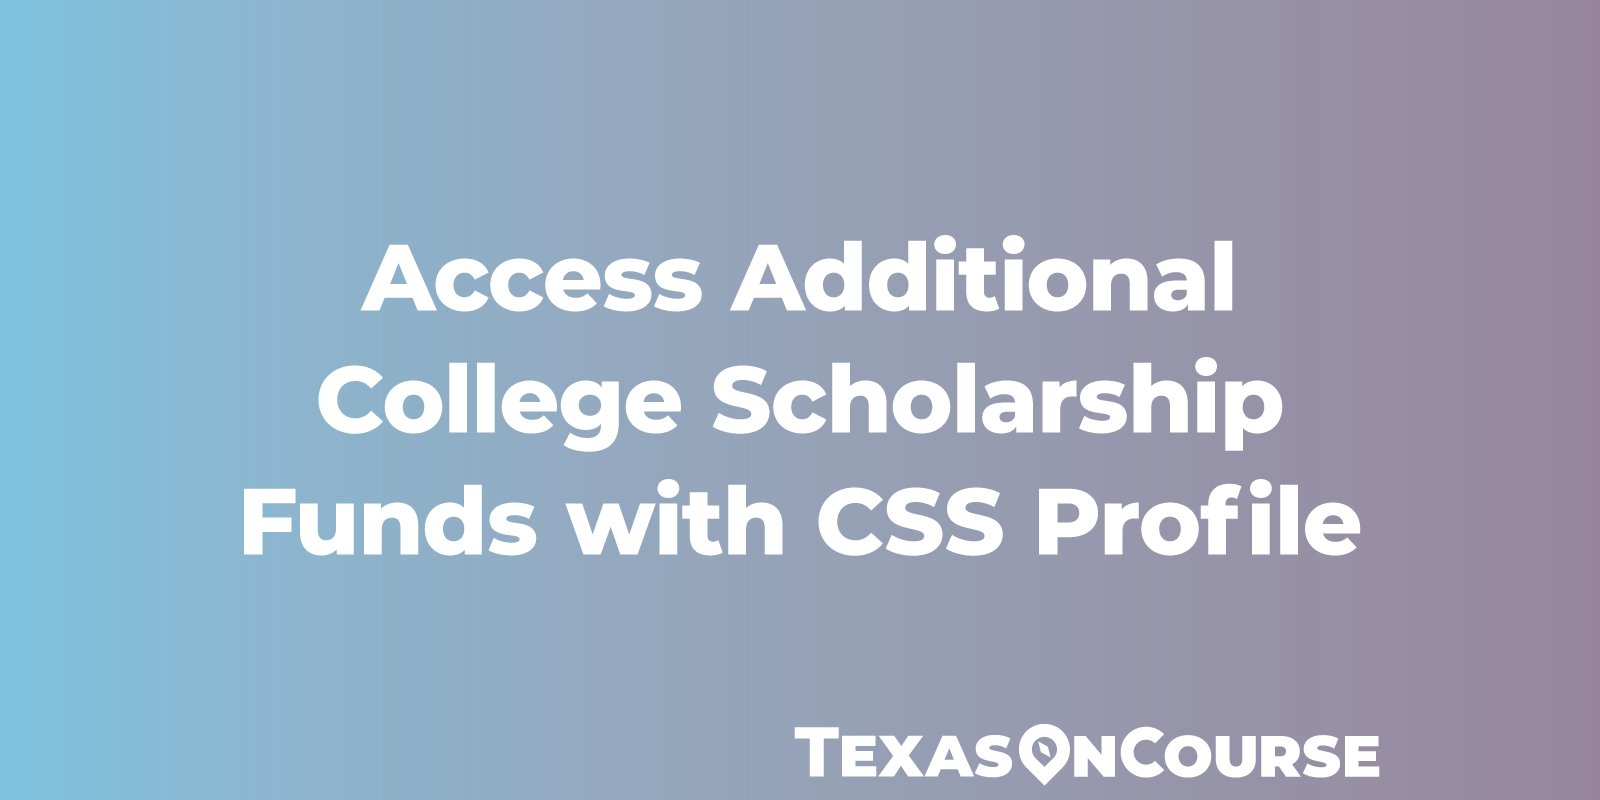 Access Additional College Scholarship Funds with CSS Profile